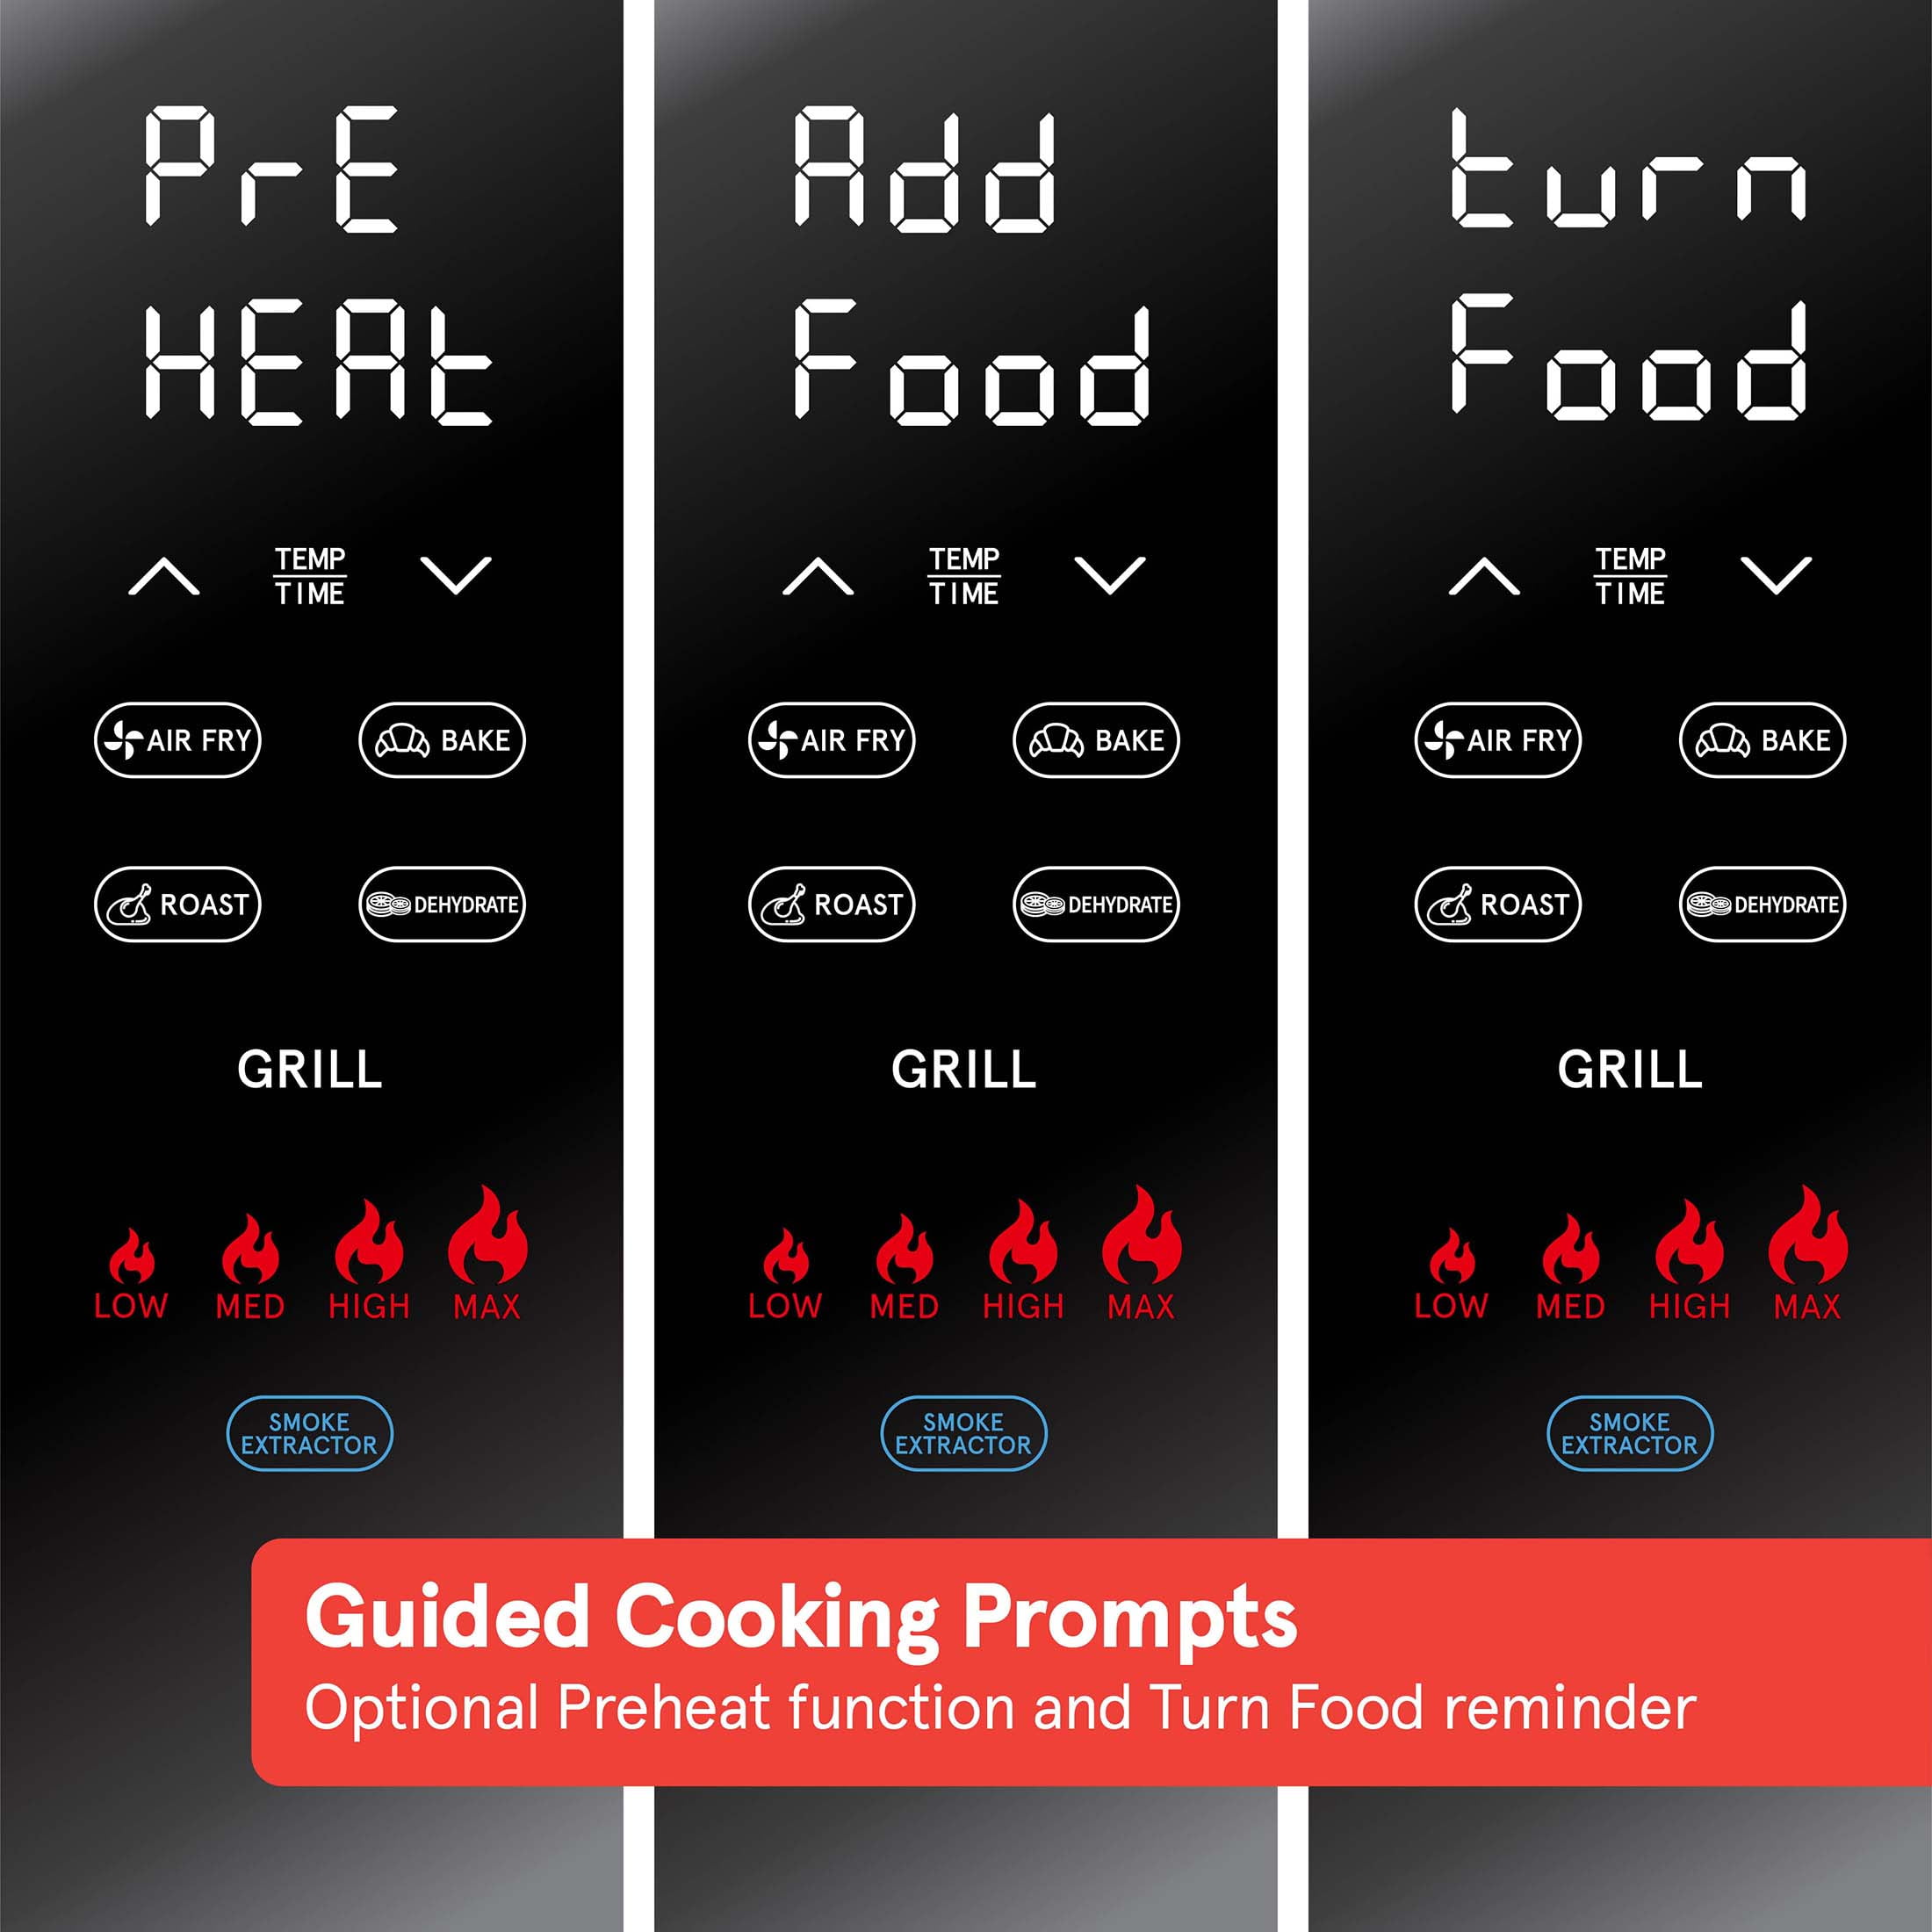 Gourmia FoodStation Smokeless Grill, Griddle & Air Fryer with